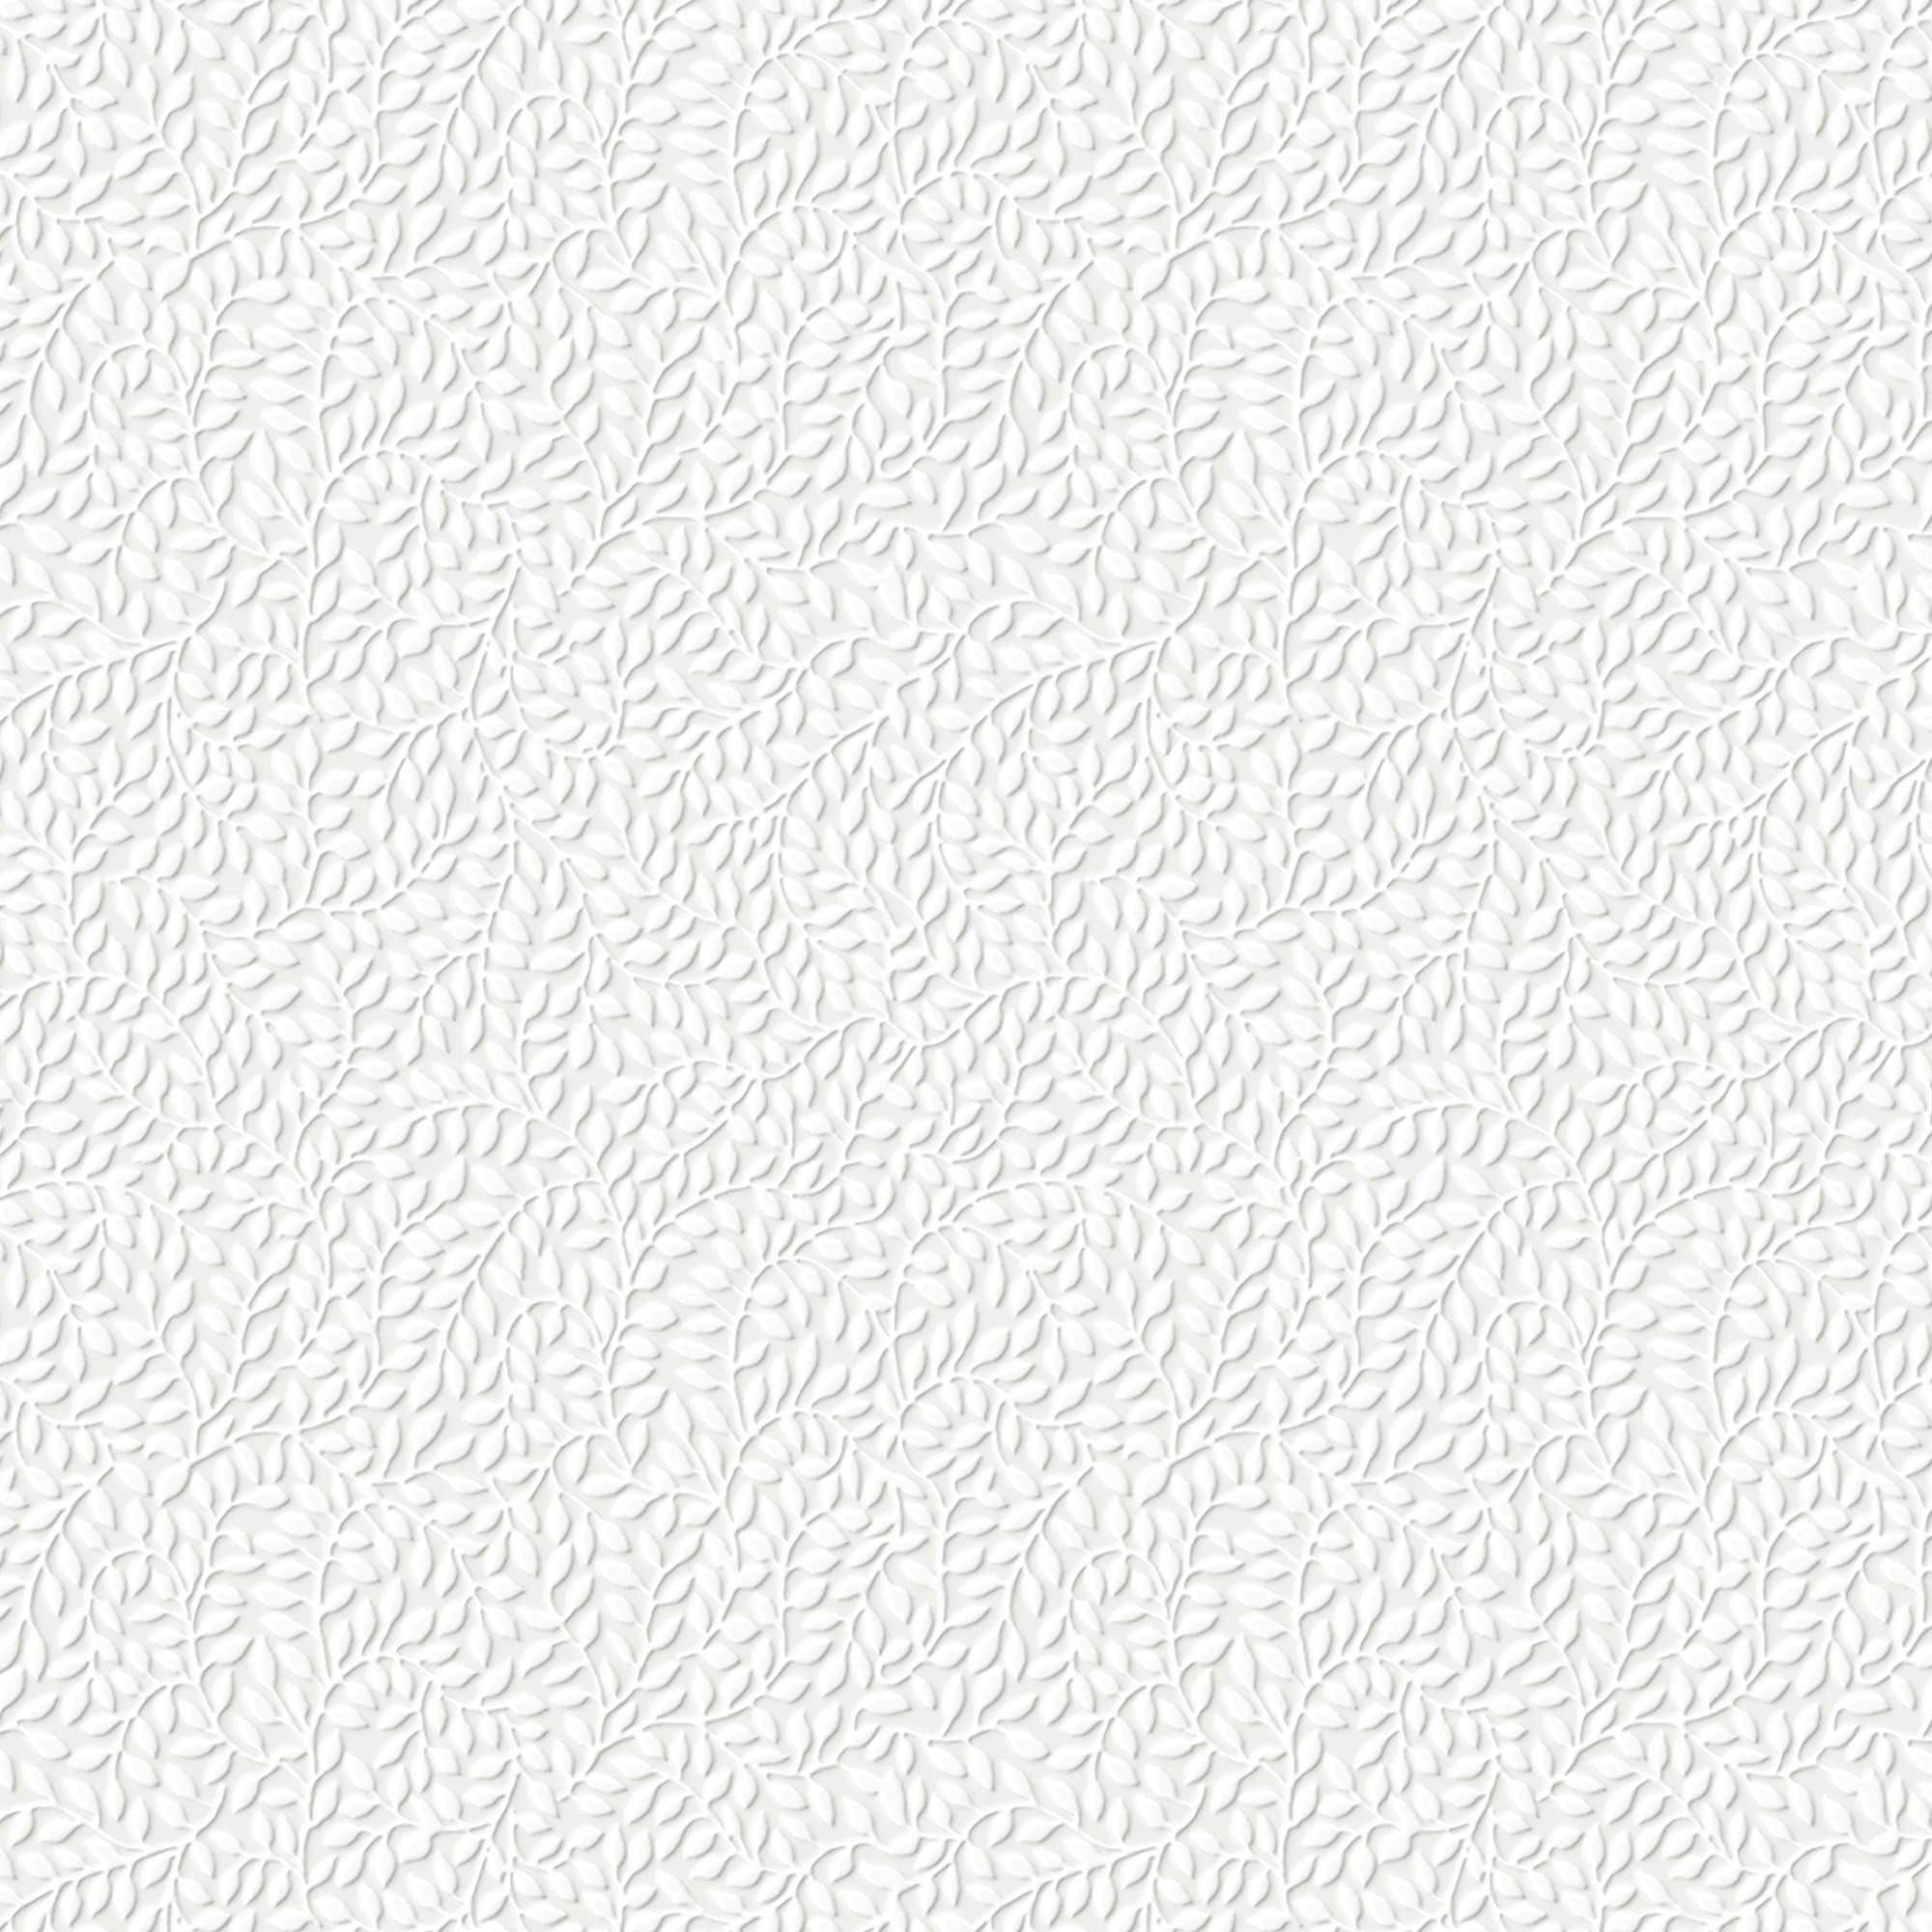 Canvas texture coated by white primer. Seamless square texture